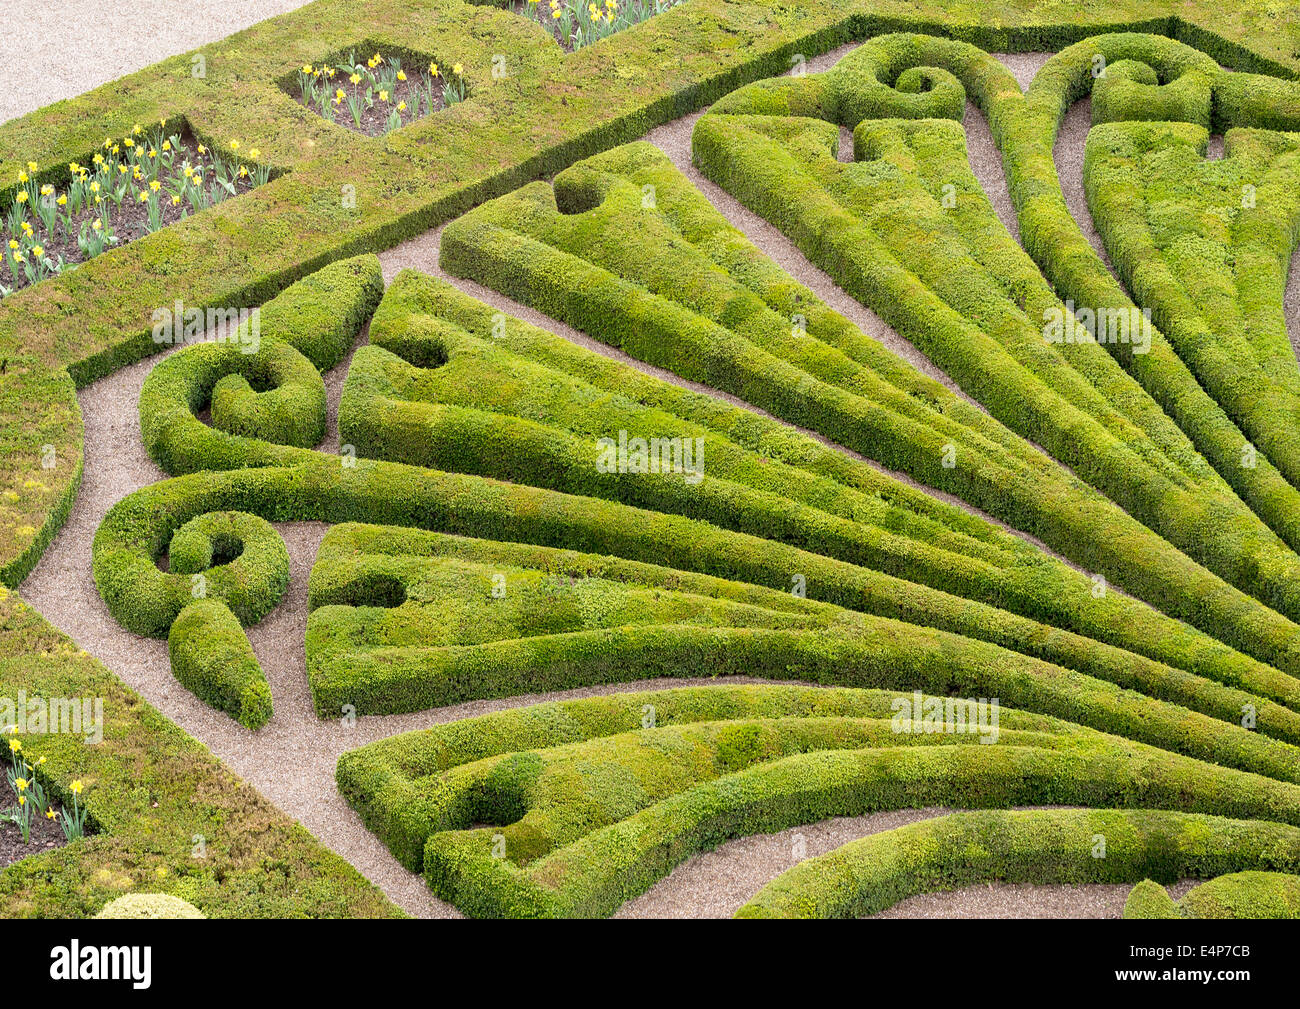 Formal Pattern Hedging. The patterned hedging at the Bishop's Palace garden. Palace of Berbie, Albi, Tarn, France Stock Photo